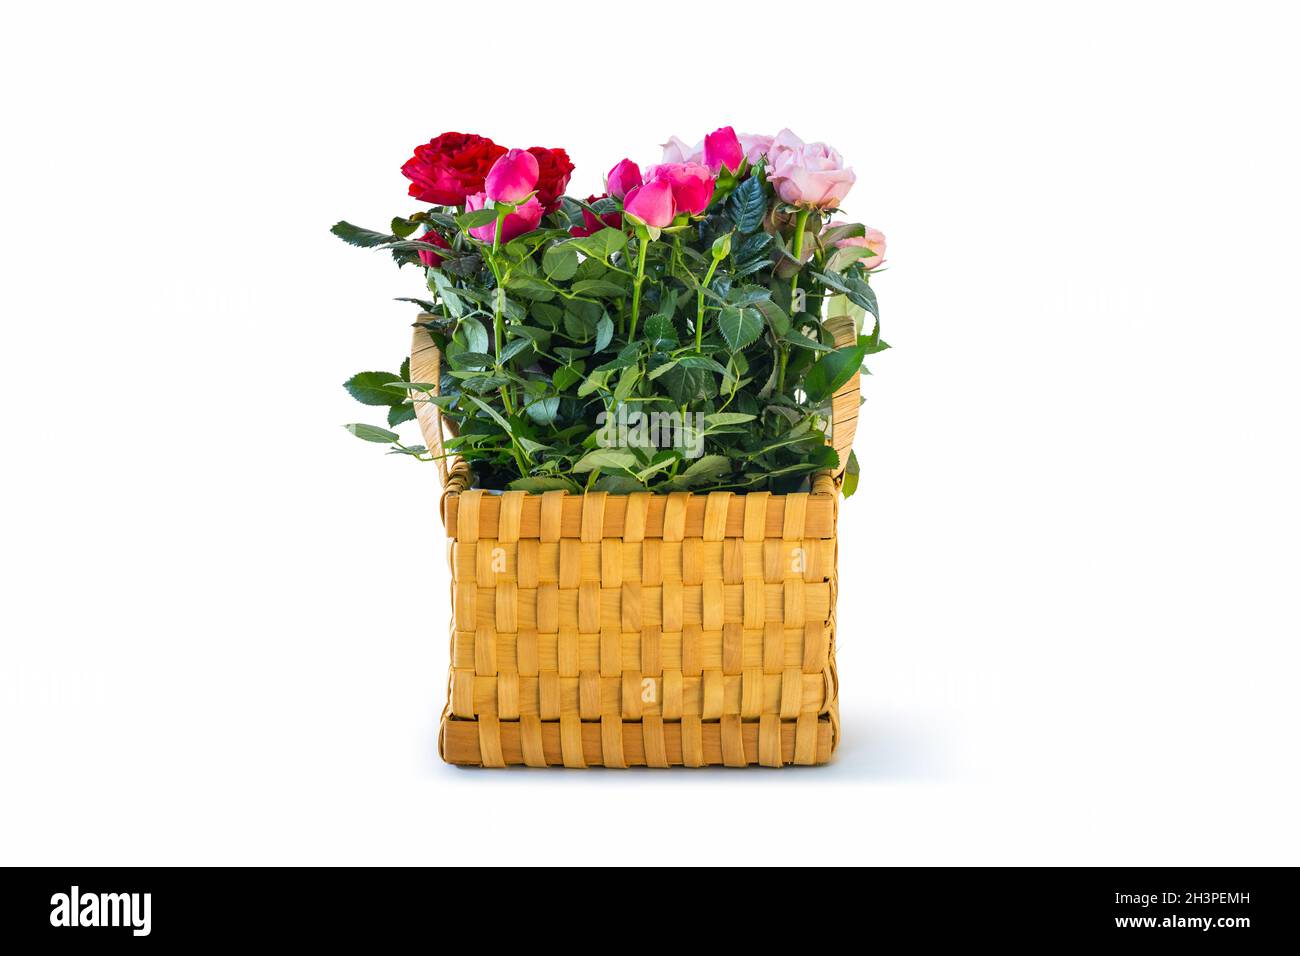 Colorful chinese rose in flower basket Stock Photo